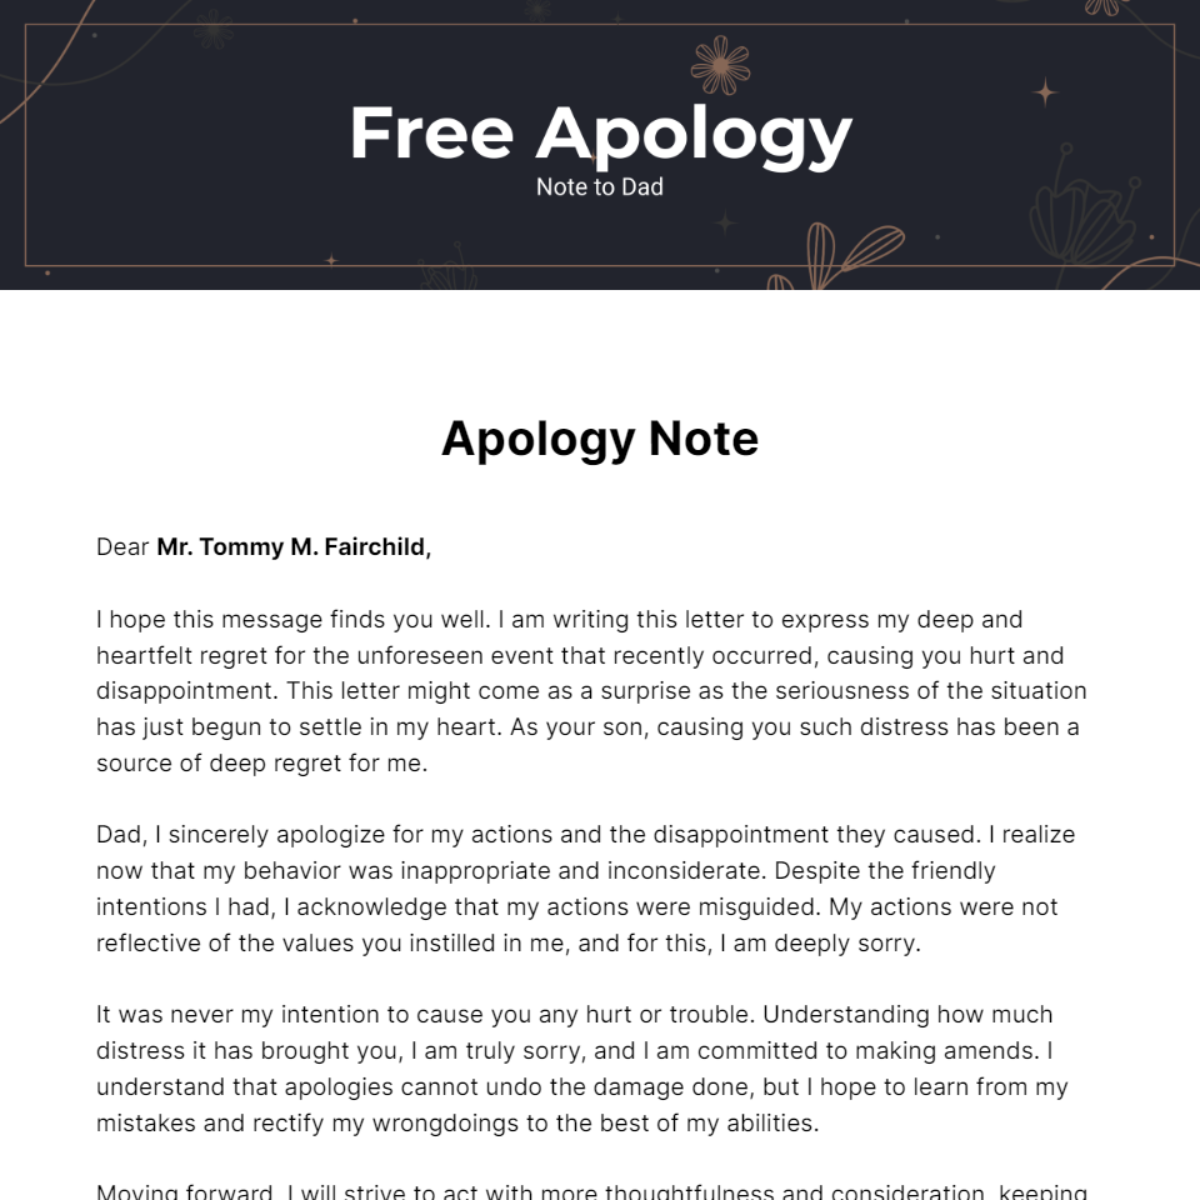 Free Apology Note to Dad Template